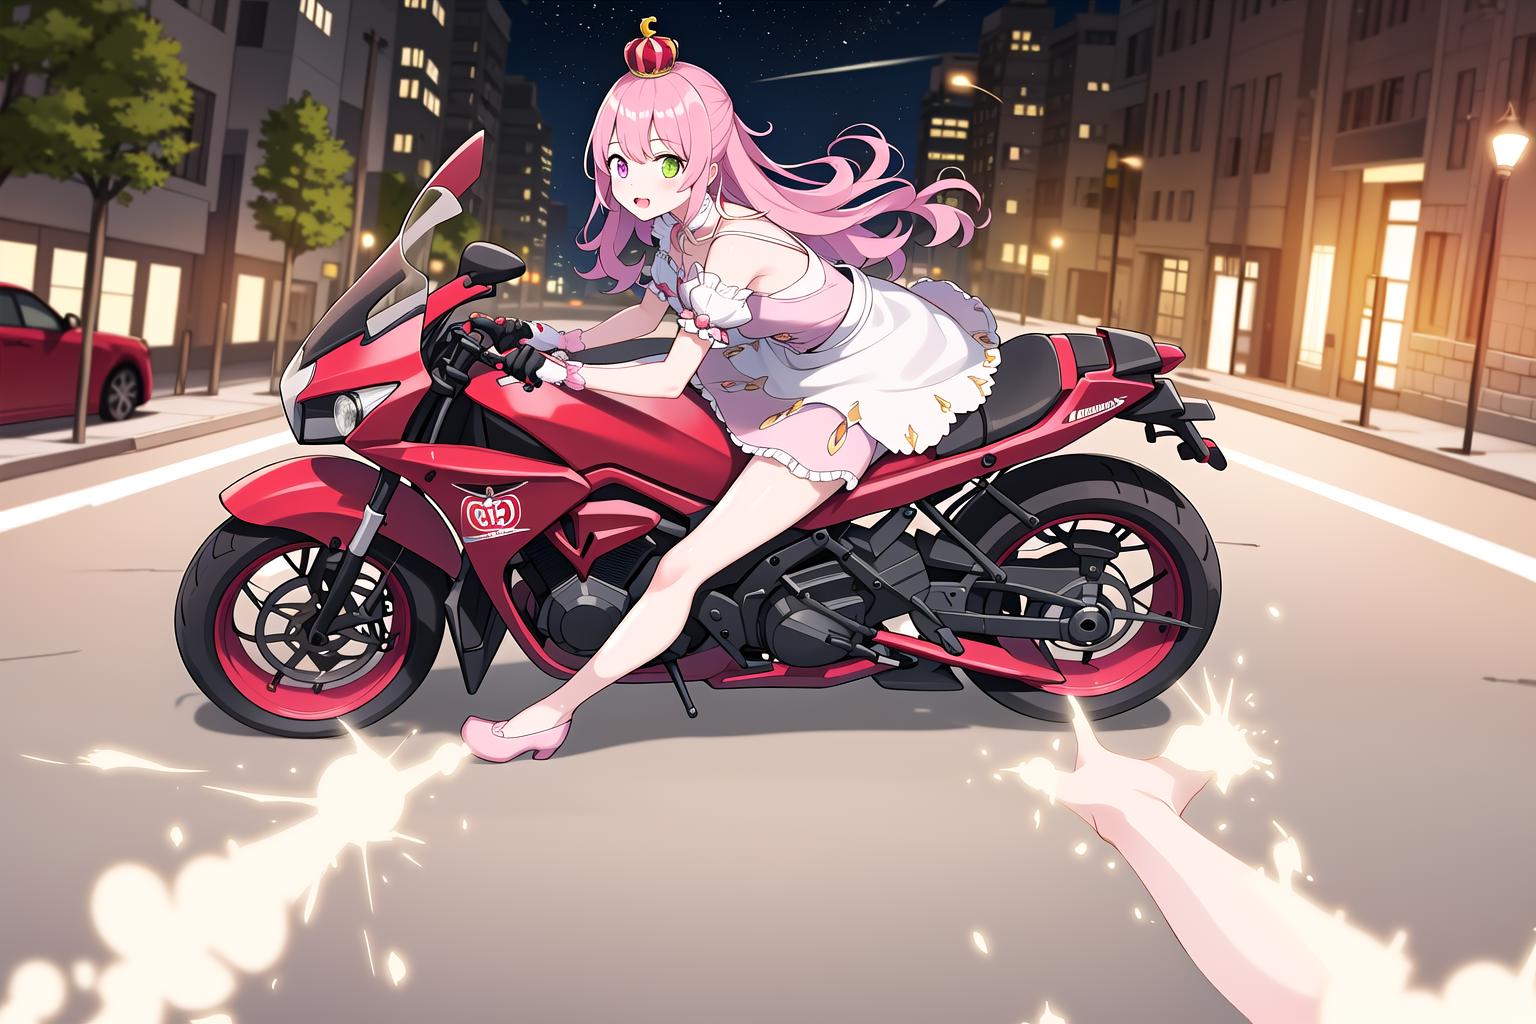 A cartoon illustration of a girl riding a motorcycle at night.